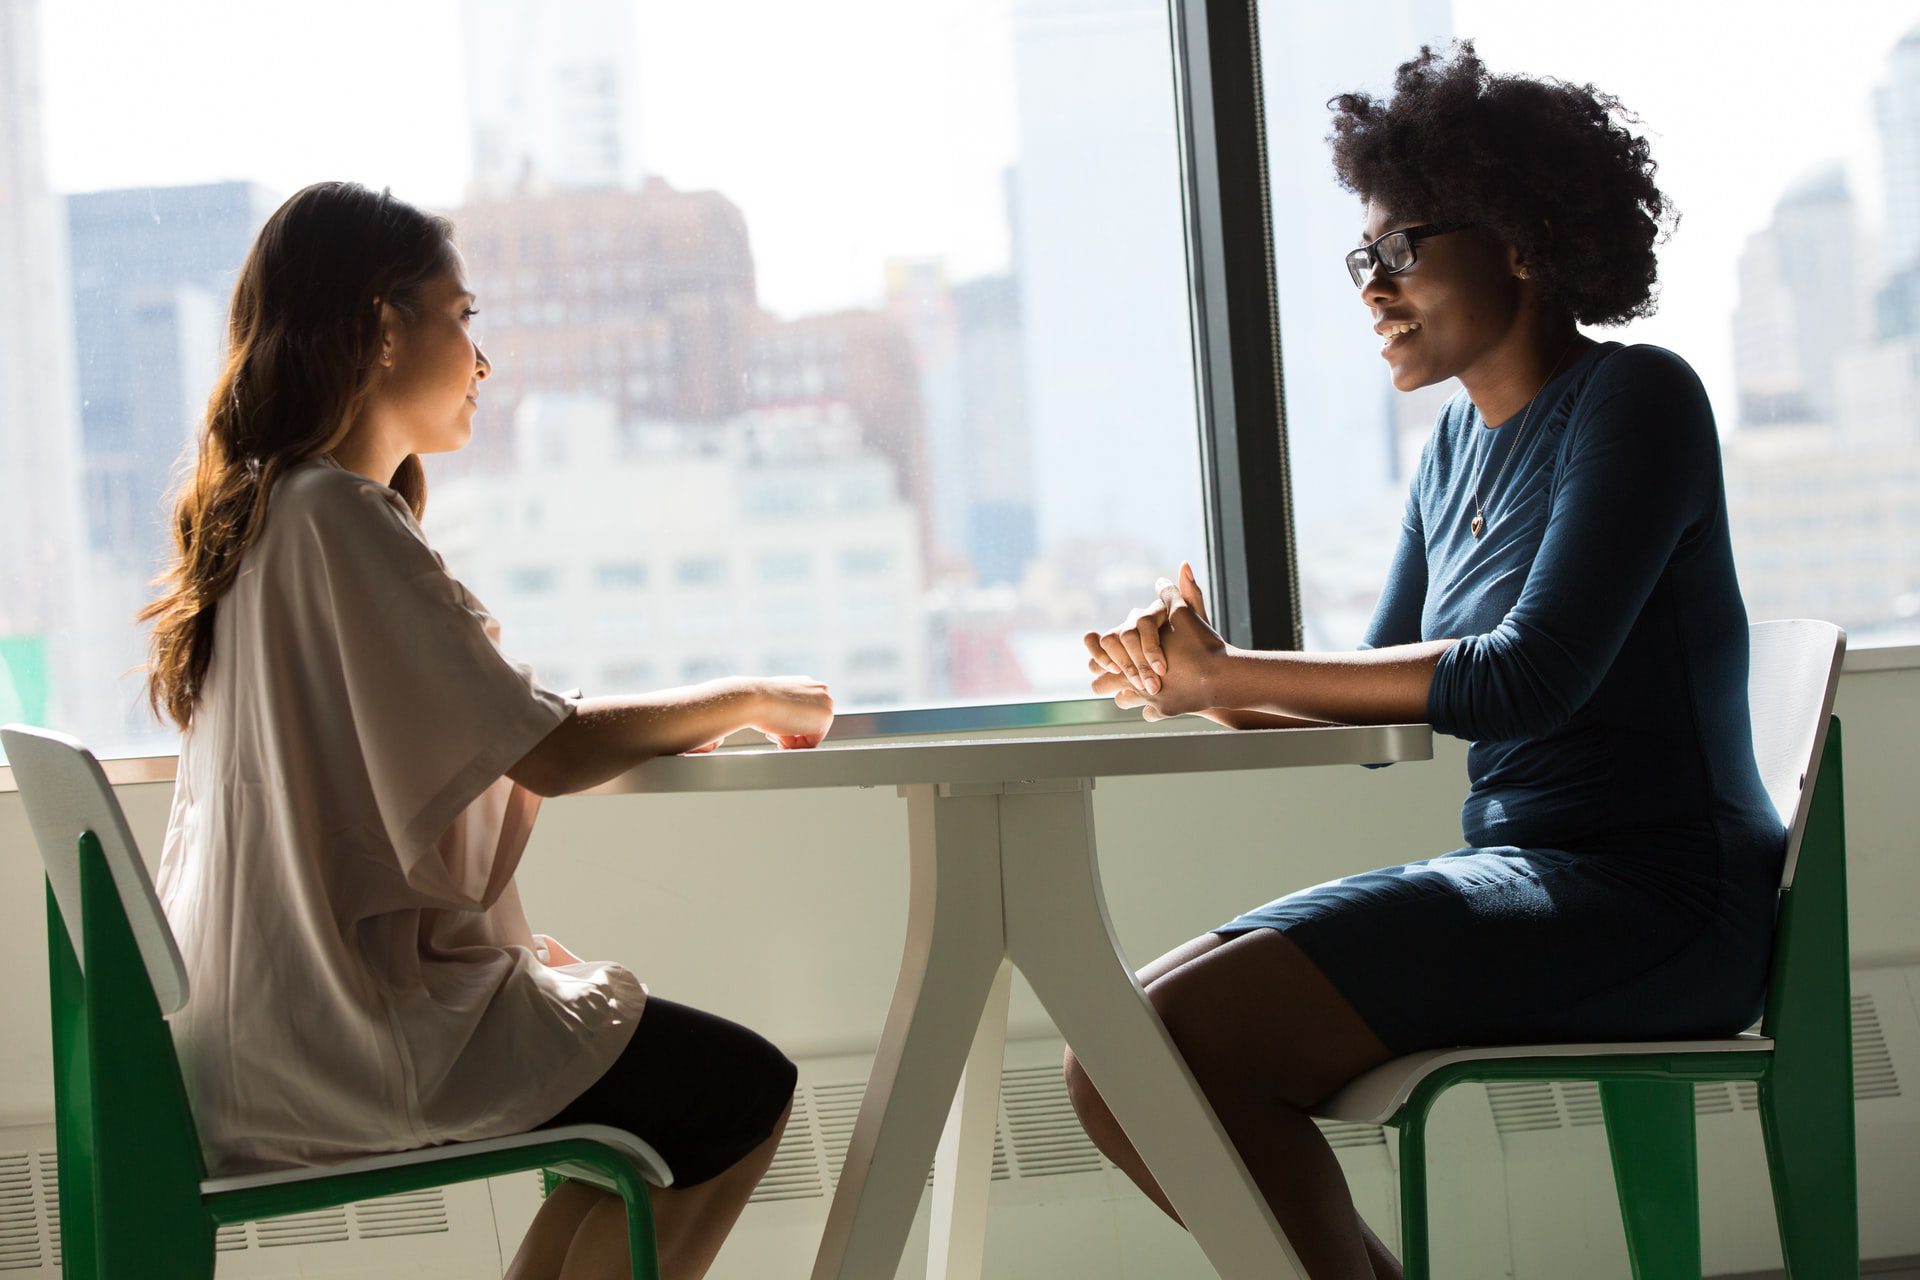 Common Web Developer Interview Questions and How to Answer Web Developer Interview Questions and AnswersThem URL: https://unsplash.com/photos/LQ1t-8Ms5PY Alt-text: Two women sit in front of each other during an interview. Job interviews can be nerve-racking, but knowing how to prepare can make all the difference. For a development job interview, you’ll need to be ready for highly technical questions, as well as questions that delve into your background and skills. To help you get ready, we’ve compiled the most common web developer interview questions and answers that you’ll likely face when it’s your turn to be interviewed. What Is a Web Developer? A web developer creates and manages websites. They are responsible for overseeing the performance of a website, deciding its layout and design, and analyzing the traffic it receives. In order to learn web development, you need to have exceptional coding skills, as programming languages are the primary building blocks with which websites are built. As a web developer, the scope of your work will depend on your specialization. If you are a front end web developer, then you are responsible for the user interface, design, layout, and overall aesthetic of the website. On the other hand, a backend web developer covers the server-side to ensure the website runs smoothly. Finally, full stack developers work on the design and server-side of a site. Answers to the Most Common Web Developer Interview Questions Once you get an opportunity to be interviewed for a web developer job, you will be answering different sets of questions. You will be asked technical questions to assess your knowledge of the subject. You will also have to answer behavioral questions to gauge how you work with other people, as well as general questions to get to know your background and experience. Top Five Technical Web Developer Interview Questions and Answers A technical interview is perhaps the most important stage of a web developer interview because it is the company’s way to gauge the depth of your expertise. The interviewer will inquire about your coding skills, projects that you’ve completed, and programming languages you’re comfortable using. Here are some technical interview questions to consider and how to best answer them. What programming languages are you comfortable working with? Coding is a primary web developer skill that you will learn as part of the basics. Different companies have different programming languages that they use for most of their products. As this is a web developer job, you must be able to demonstrate that you are knowledgeable in HTML, CSS, and JavaScript. The specific type of web developer job that you are applying for also makes a difference. For instance, if you are applying for a backend web developer position, you should develop strong SQL skills because this is the main programming language used for database management. In addition, you should be familiar with some of the best web development languages such as Python, Java, C+, and more. As a follow-up question, you may be asked about the core elements of HTML, CSS, and JavaScript. Common follow-up questions are: What is a block element and an inline element in HTML? What are CSS selectors? What is the CSS box model and what is the margin of a box element? What are pseudo-classes in CSS? How does CORS affect the web development process? Cross-origin resource sharing (CORS) is an essential HTML component that allows you to share a set of resources from one domain to another. This works best for front end web developers because it is used to “copy” styles, fonts, and content. While sharing resources is possible, CORS also has a principle that ensures websites are secure. Under what is known as the same origin policy (SOP), there is a guarantee that while a website can use the same resources and elements as another, there is a restriction in place. This prevents security attacks and information theft. In a web development job interview, security matters a lot, so you must know the right measures to guarantee the protection of data. How do you achieve responsive web design? To achieve responsive web design, you must first be familiar with basic web and UX/UI design. Knowing the right elements to use will help you achieve an optimal viewing experience. A responsive design says a lot about the quality of the user experience on a website. In responsive design, you want to make sure that the website is adjusting well to the screen upon which it is displayed. When you switch your view from a wide-screen laptop computer to a mobile phone, all the elements, like font size or image size, should adjust. Being able to answer this question shows that you understand basic design principles as a web developer. Between HTTP 2.0 and HTTP 1.1, which is better? This might seem like a trick question because HTTP 2.0 is just an improvement from HTTP 1.1. HTTP 2.0 reduced the load time of websites. It prioritizes loading the content first and enables various resources to load all at once. Additionally, modern browsers use HTTP 2.0 because of its SSL encryption, which helps guarantee the safety of data. Taking the CORS principle into account, HTTP 2.0 also supports the sharing of various resources from one domain to another. How do you properly configure a RESTful API? Your knowledge in backend web development is tested by this basic technical question as it deals with servers and databases. The application programming interface or API sets up the communication between websites and databases. If you need information from a website, then your server will contact it, and it should provide the right data. A RESTful API guarantees that you are retrieving the information that you need. For example, if a user searches for a specific topic on a search engine, it should be able to pull up the relevant sites needed. As a web developer, you want to make sure that there is a precise movement of data from all of these servers and databases. Top Five Behavioral Web Developer Interview Questions and Answers Behavioral interview questions will test your overall personality and your ability to be a team player. During a web developer interview, the recruiter will want to look at how you deal with problems and how you work with other people. Inquiring about your experiences and attitude toward a difficult situation is a normal part of the interview process, and it might include questions like the ones listed below. Are you comfortable with pair programming? Pair programming is a coding technique in which two programmers work on a specific project. It fosters excellence and camaraderie through cooperation, and companies would prefer that you are open to it. Not being comfortable with pair programming could give the impression that you are unwilling to work with others. Can you name a successful project you completed as a web developer? How did you work on it? This is a common question in an interview process designed to look at your process, more than your achievements. To answer this question, you can demonstrate your technical skills by informing the interviewer about the strategies and technologies that you used. More importantly, you should be able to describe if you worked on it alone or with a team, and what valuable lessons you learned along the way. How do you deal with negative feedback on your project? Negative feedback is common, especially in the early stages of a project. This question is designed to show whether you accept constructive criticism and what you do with it. It is best to cite a specific example and describe the ways in which you incorporated the feedback into your revisions. If you are uncomfortable with negative feedback, it is best to train yourself to respond better to it. What do you do when a program you worked on does not run? To answer this question, you can talk about a specific example and the strategies you implemented to address the problem instead of simply stating what you felt. In the interest of being amiable, you can still express your personal thoughts. However, since this is a web developer interview, your interviewer is more interested in knowing whether you were quick to resolve issues as they came up. How comfortable are you with meeting project deadlines? Remember that you will work for a client that needs the project ready by a specific date. This question measures your ability to respect client timelines and stick to deadlines. You can also talk about your ability to negotiate with clients if you feel that a project cannot be accomplished in their expected timeframe. Top Five General Web Developer Interview Questions and Answers General web developer interview questions may include introductory questions and anything that sheds light on you and your previous work experience. Usually, this takes place during the first stages of your interview. Why did you decide to apply to this specific web developer position? This question gauges your understanding of the role and whether you are aware of what is required from you. Make sure to read the job description thoroughly, because this will tell you exactly what you need. Reading up about the company will also help you discuss why this specific working environment is appealing to you. What is your background in web development? Talk about your educational background first, especially any training or certifications that you’ve earned. Some companies prefer degree holders, but major tech firms often partner with coding bootcamps to hire talent. Finally, if you have any personal projects or web development work, make sure to bring them up as well. Do you prefer to work on web or mobile applications? The best way to answer this is to talk about your capabilities to work on both. Web development and mobile development are two interconnected specializations, and as a web developer you must be skilled in both. Do you have any previous internships or work experience? Internship experience is ideal for fresh graduates applying for entry-level positions. Talk about any project that you worked on, especially the large-scale, successful ones. If you have previous work experience, including freelance projects, make sure to mention them as well. Your interviewer wants to know your level of expertise, especially for jobs that call for a few years of experience. What is your least favorite website and why? When answering this question, you need to discuss the technical issues and elements that make your cited website below average. You can talk about the design, functionality, or user experience. You can also talk about how you would improve it if given the chance. This is one way for your interviewer to make sure you have a critical eye and are able to focus on how to improve things and keep up with new trends and technologies. Tips to Prepare for a Web Developer Interview URL: https://unsplash.com/photos/JaoVGh5aJ3E Alt-text: A woman takes notes while having a discussion with another woman. Caption: Make sure you are well prepared for your upcoming interview and build rapport with your interviewer. 1. Preparation is Key Make sure you are ready to answer questions during the different stages of the interview, from the more general initial questions to the in-depth technical and behavioral interview questions. If you are applying for a position at a tech company, it is best to do your research so you can show why you’d be a good fit. Make sure that you understand the job description well and have all of your credentials ready. 2. Study for Technical Interview Questions Technical questions will take up a large portion of your interview. Make sure you take some time to review the fundamentals of web development. You can also revisit more advanced topics like content management systems, adaptive designs, and responsive web design. 3. Be Presentable Whether it is an in-person interview or a video call, make sure that you are presentable. Dressing appropriately gives the interviewer the impression that you are taking this seriously. If you are interviewing over a video call, make sure you are in a quiet place to avoid unnecessary noises. What Skills Should I Put on My Web Developer Resume? Highlight these necessary skills in your web developer resume, or even your LinkedIn profile, to immediately capture the company’s attention. Your resume content should be directly relevant to a web developer’s duties and responsibilities. Advanced Coding Skills Your job as a web developer will revolve around coding, so you must be well-versed in as many programming languages as you can. Some of the most important languages are HTML, CSS, and JavaScript. You must also have practical SQL experience because this plays a huge role in database and server maintenance, which all web developers should be familiar with. An Eye for Optimal Design To achieve optimal and interactive web applications, you need to have an eye for design. Other than knowing the basic design principles, you must follow trends and observe other websites to see what’s effective. Your goal is to provide a smooth user experience through the design and structure of your websites or mobile apps. Good Communication Skills Soft skills like good communication will take you far as a web developer. Communication skills are needed to foster healthy collaboration with your clients and teammates. As a web developer, the websites or applications you create are means of communication between individuals or stakeholders. How to Find Web Developer Jobs These web developer resources might come in handy while you look for a web developer job. Some of these sites offer helpful tips for coding interviews, ideas for all types of projects related to web development, and more. GitHub GitHub is a trusted resource for web and software developers. Here you can find helpful tips, forums, instructions, and even source code for projects you are interested in. You can create a profile where you can showcase all of your web development projects. Rather than a LinkedIn profile, you can give your GitHub profile if your potential employer asks for your portfolio. StackOverflow StackOverflow is a job site that specifically posts web developer jobs for all levels. There are more than 10,000 companies posting jobs, and the site serves over 100 million visitors monthly. Aside from being a job site, it is also a public platform where you can find external resources and even ask coding questions directly to experts. AngelList AngelList is a job site for startup companies, including tech companies and ventures. Through this site, you can find ideal opportunities in web development, and some may even offer the chance to work in Silicon Valley. You can create a profile and then job matches will be generated for you. Web Developer Interview Questions FAQ How Do I Prepare for a Web Developer Interview? Read up about the company and the position that you are applying for. Be prepared to go through the different stages of an interview, answer technical questions, and even complete a short coding test. In addition, be ready to talk about your previous web development projects and relevant skills for the job. You also want to be ready for personal questions such as "what are your favorite types of projects to work on?" or even "what do you do in your spare time?" How Is a Web Developer Interview Structured? During a web developer interview, you will go through different stages. The first stage will deal with more general questions about your educational and work background. If you qualify for the next stage, there will be behavioral interview questions as well as inquiries on your soft skills. Finally, you will have to answer technical web development interview questions that help demonstrate your level of expertise. What Should a Web Developer Wear to an Interview? It is best to wear corporate attire such as dress shirts, black pants, or anything formal. Although what you wear will not determine whether you get the job, it will still show that you are prepared and interested in making a good impression. Do Web Developers Have Technical Interviews? Yes, technical interviews make up a good portion of a web developer job interview. Through these types of questions, your interviewer will be able to gauge the extent and depth of your skills and knowledge. This is also a way to see if you are still familiar with the basics, as well as with more advanced programming languages and trends in the industry.